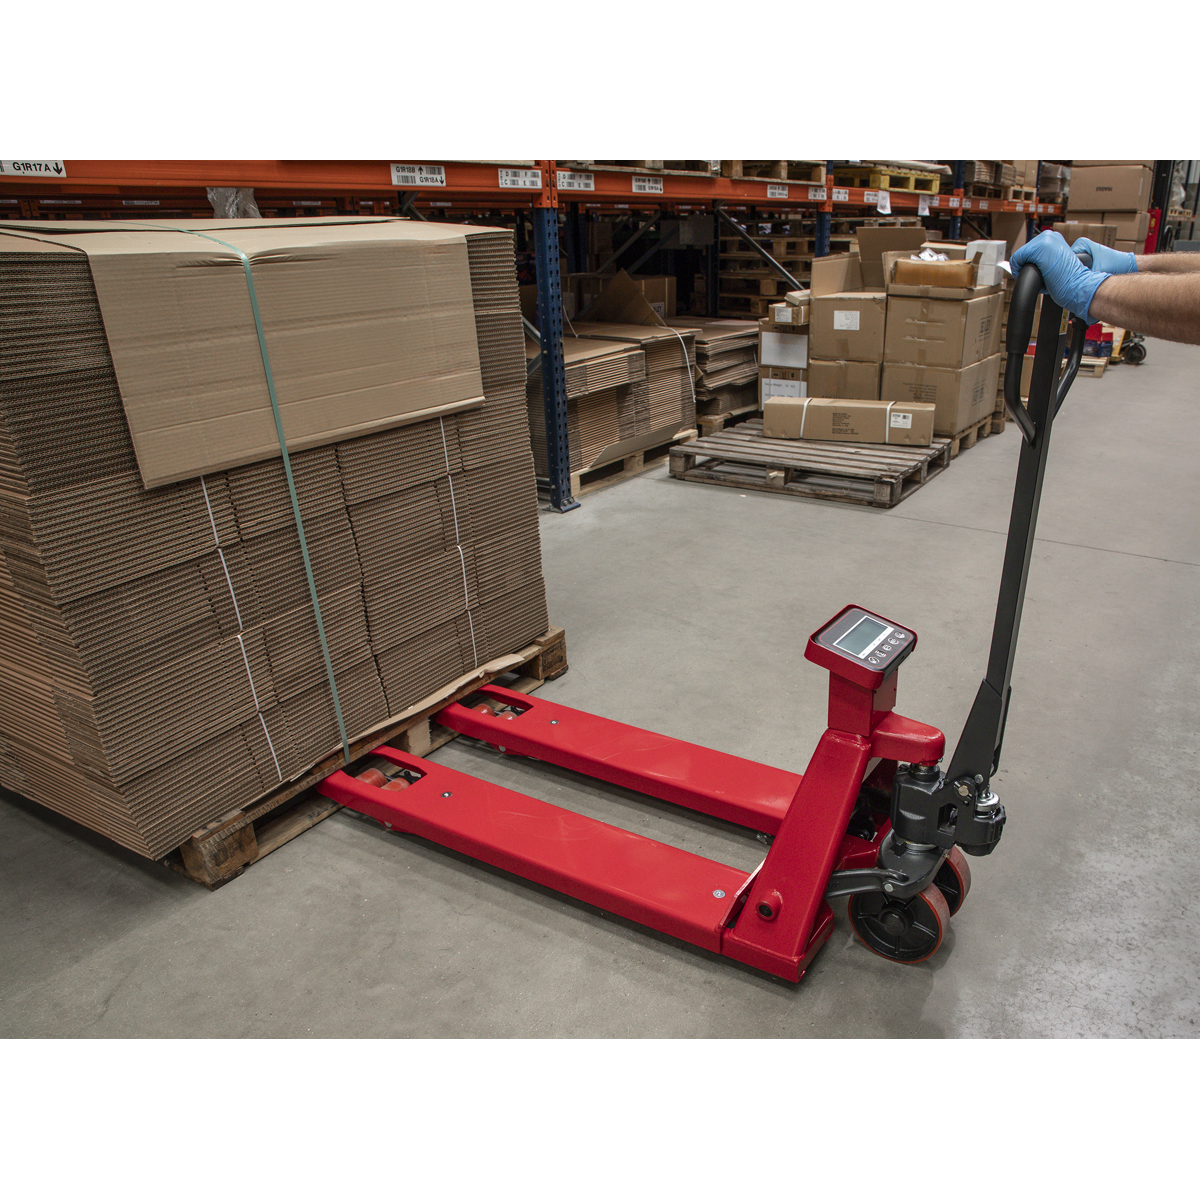 Pallet Truck with Scales - 2000kg Capacity 1150 x 555mm